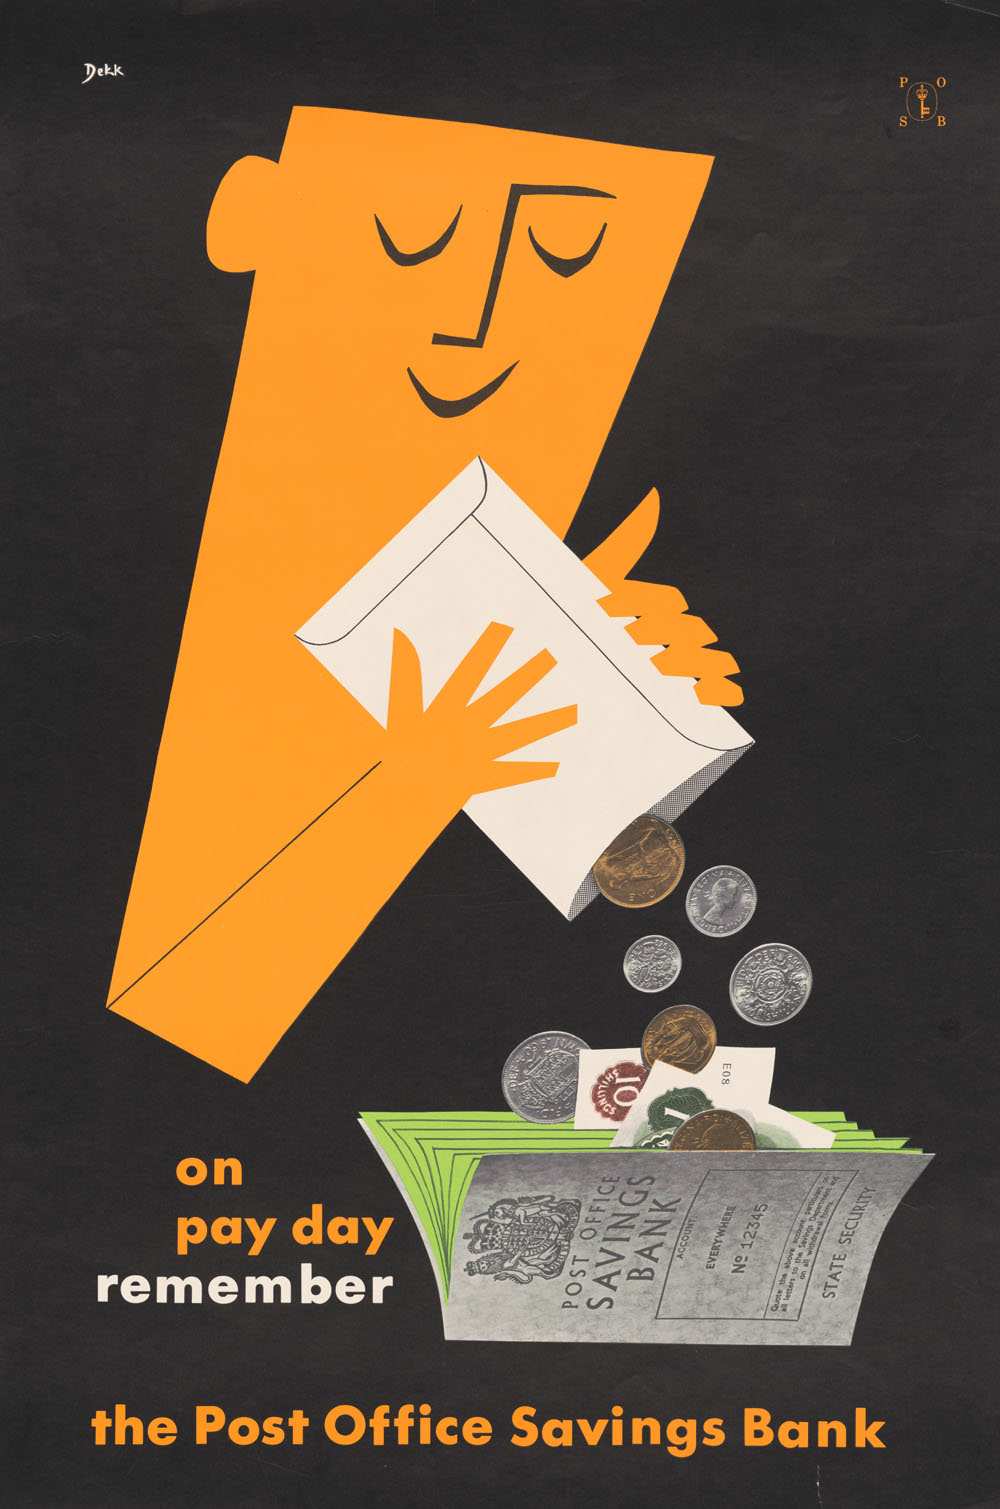 On pay day remember the Post Office Savings Bank